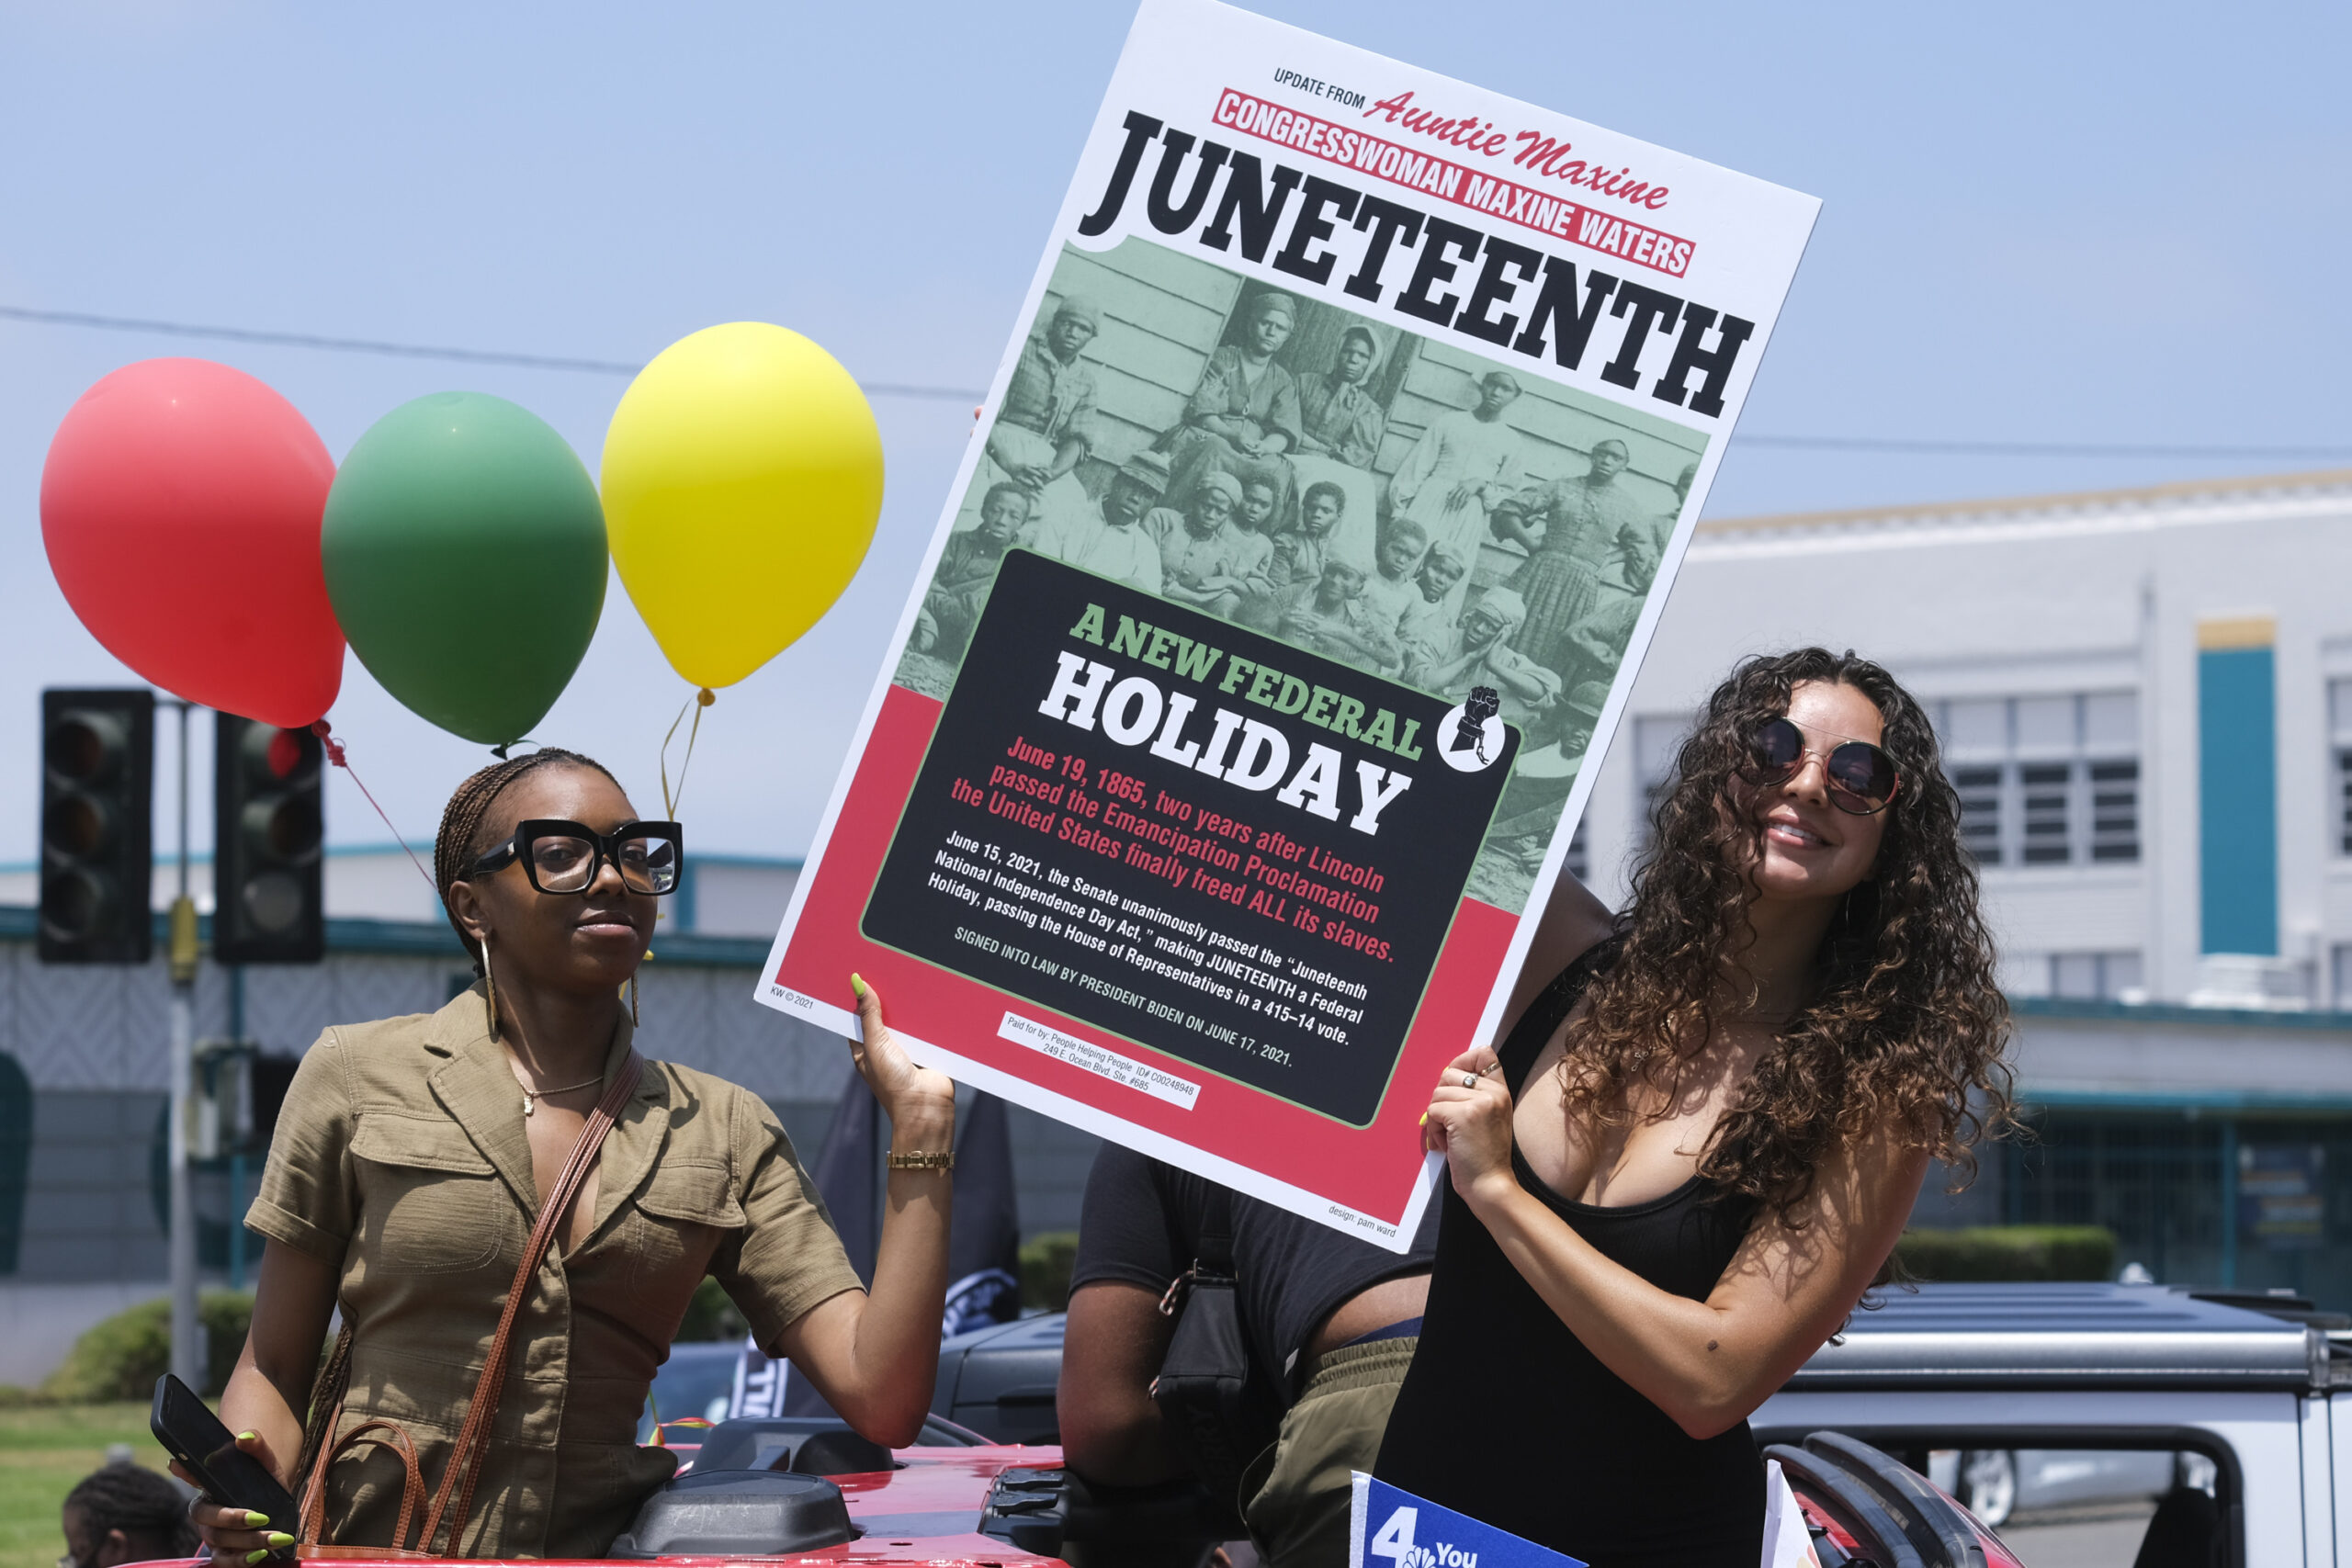 SALT LAKE CITY -- This is the second year Juneteenth in Utah has been celebrated as an official sta...